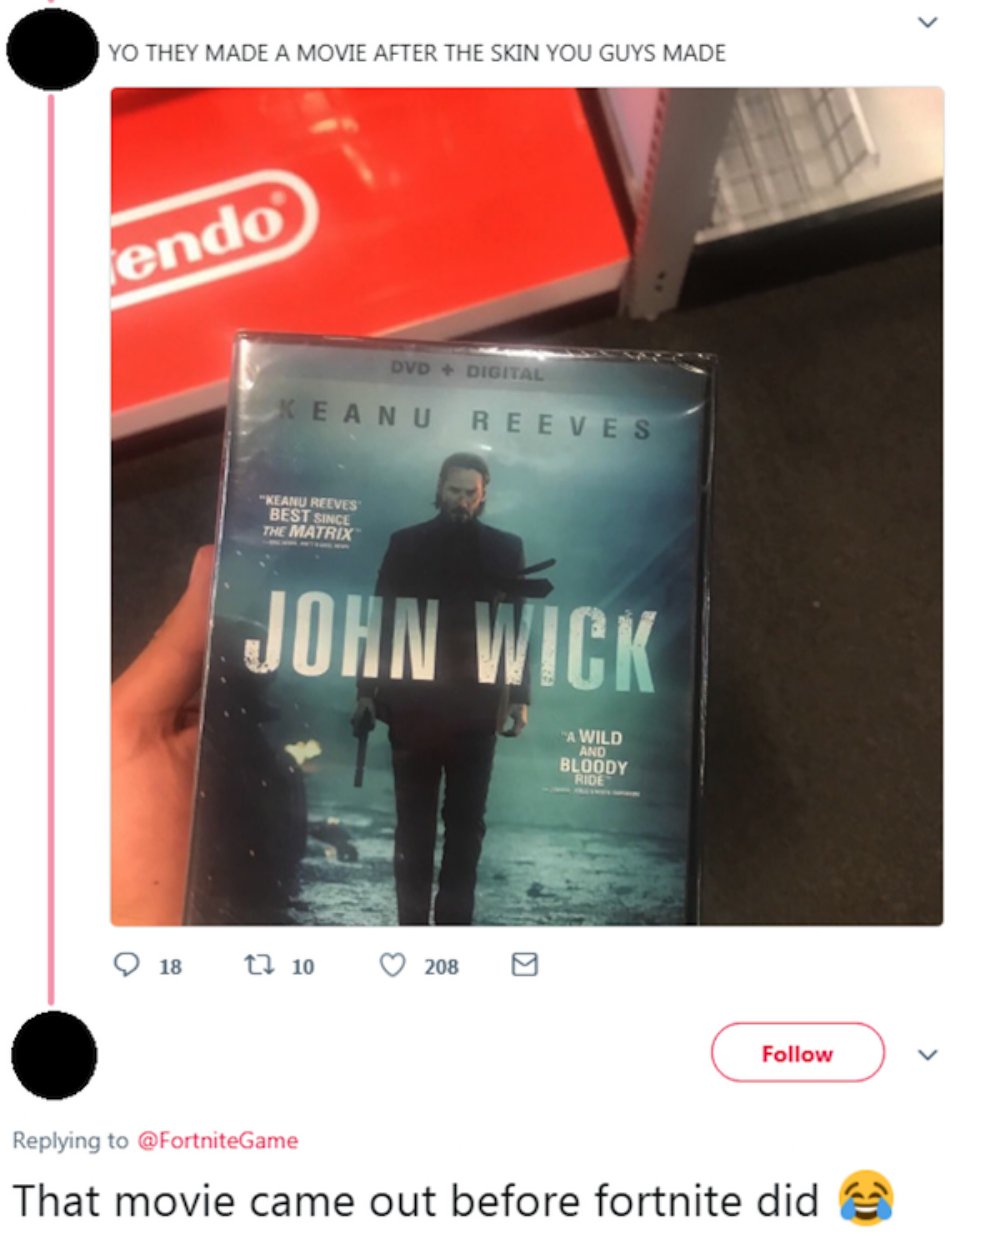 display advertising - Yo They Made A Movie After The Skin You Guys Made lendo Dvd Digital Keanu Reeves "Keanu Reeves Best Since The Matrix John Wick "A Wild And Bloody Ride 9 18 17 10 2080 u That movie came out before fortnite did